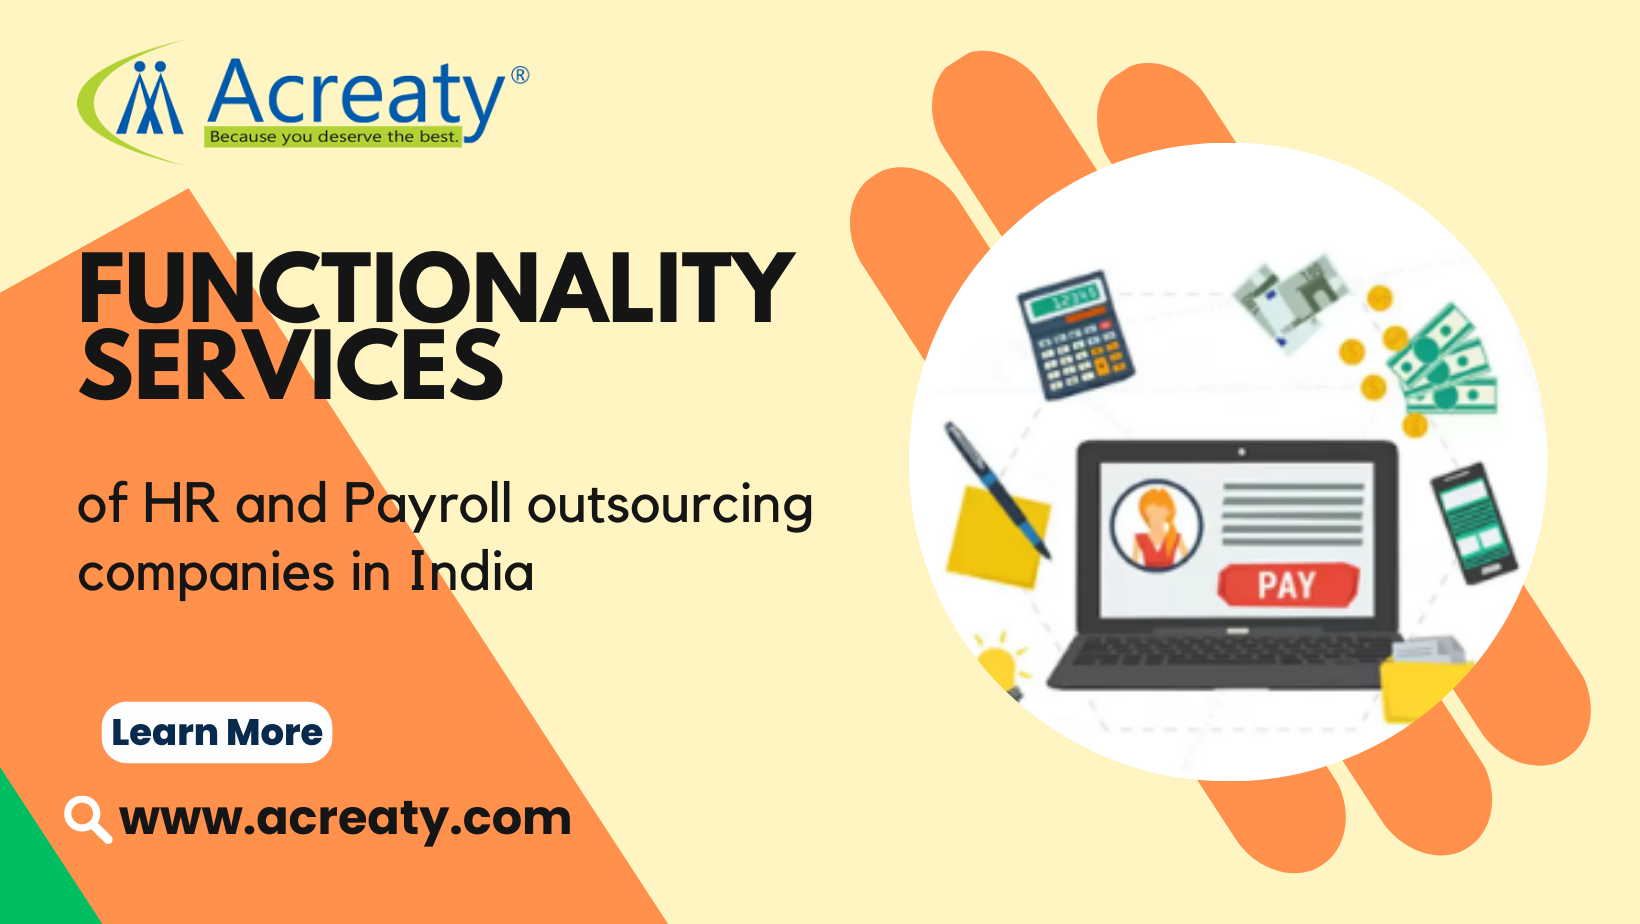 Functionality services for HR and Payroll outsourcing companies in India